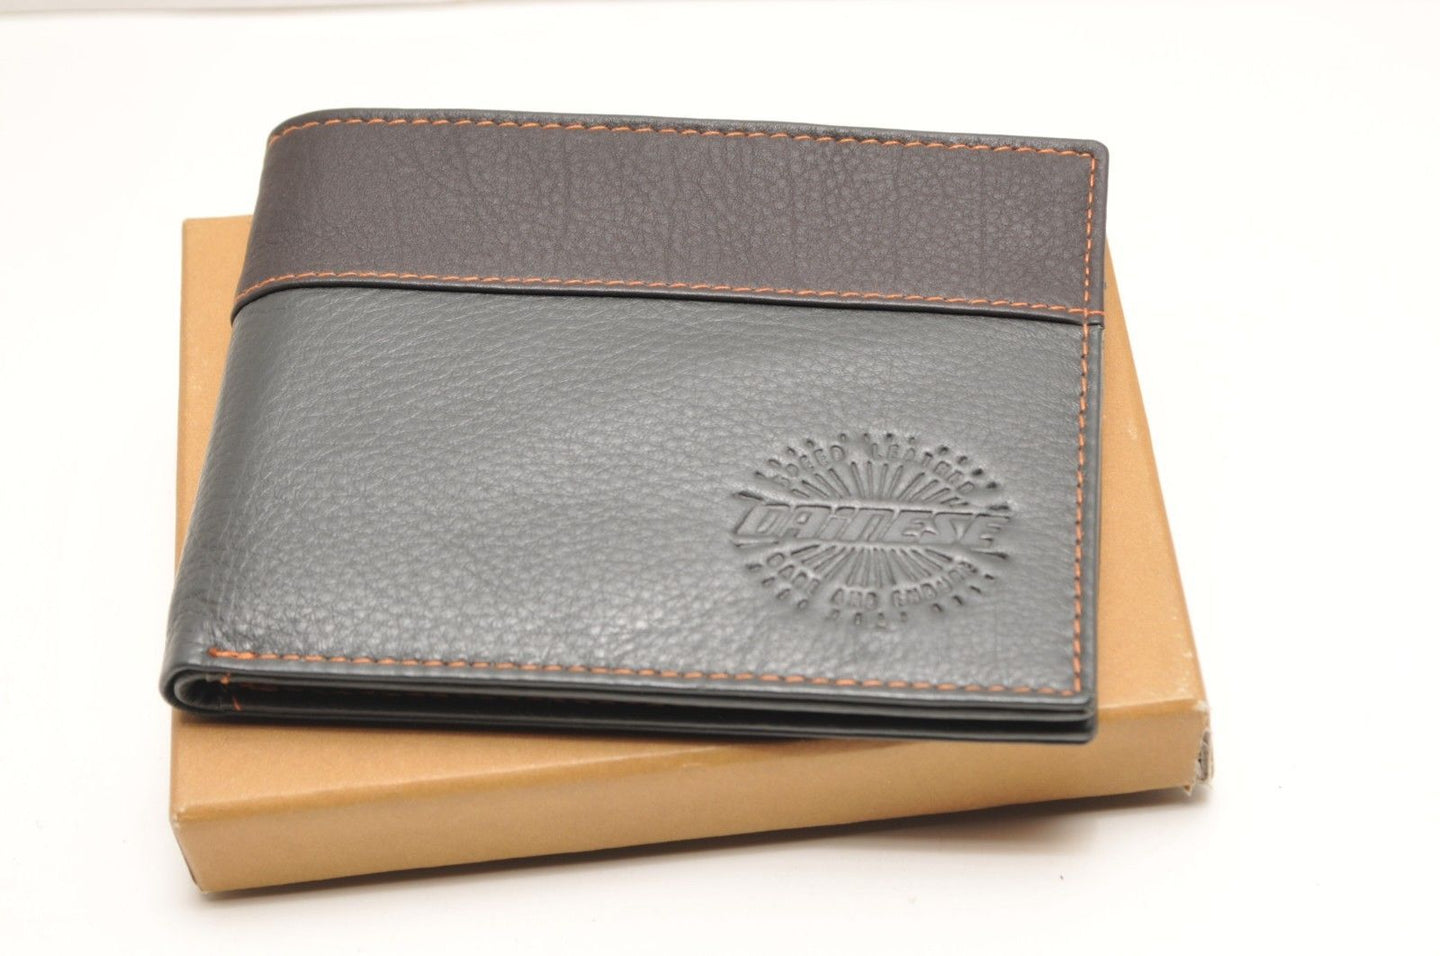 081051● CALEE PLANE LEATHER LONG WALLET